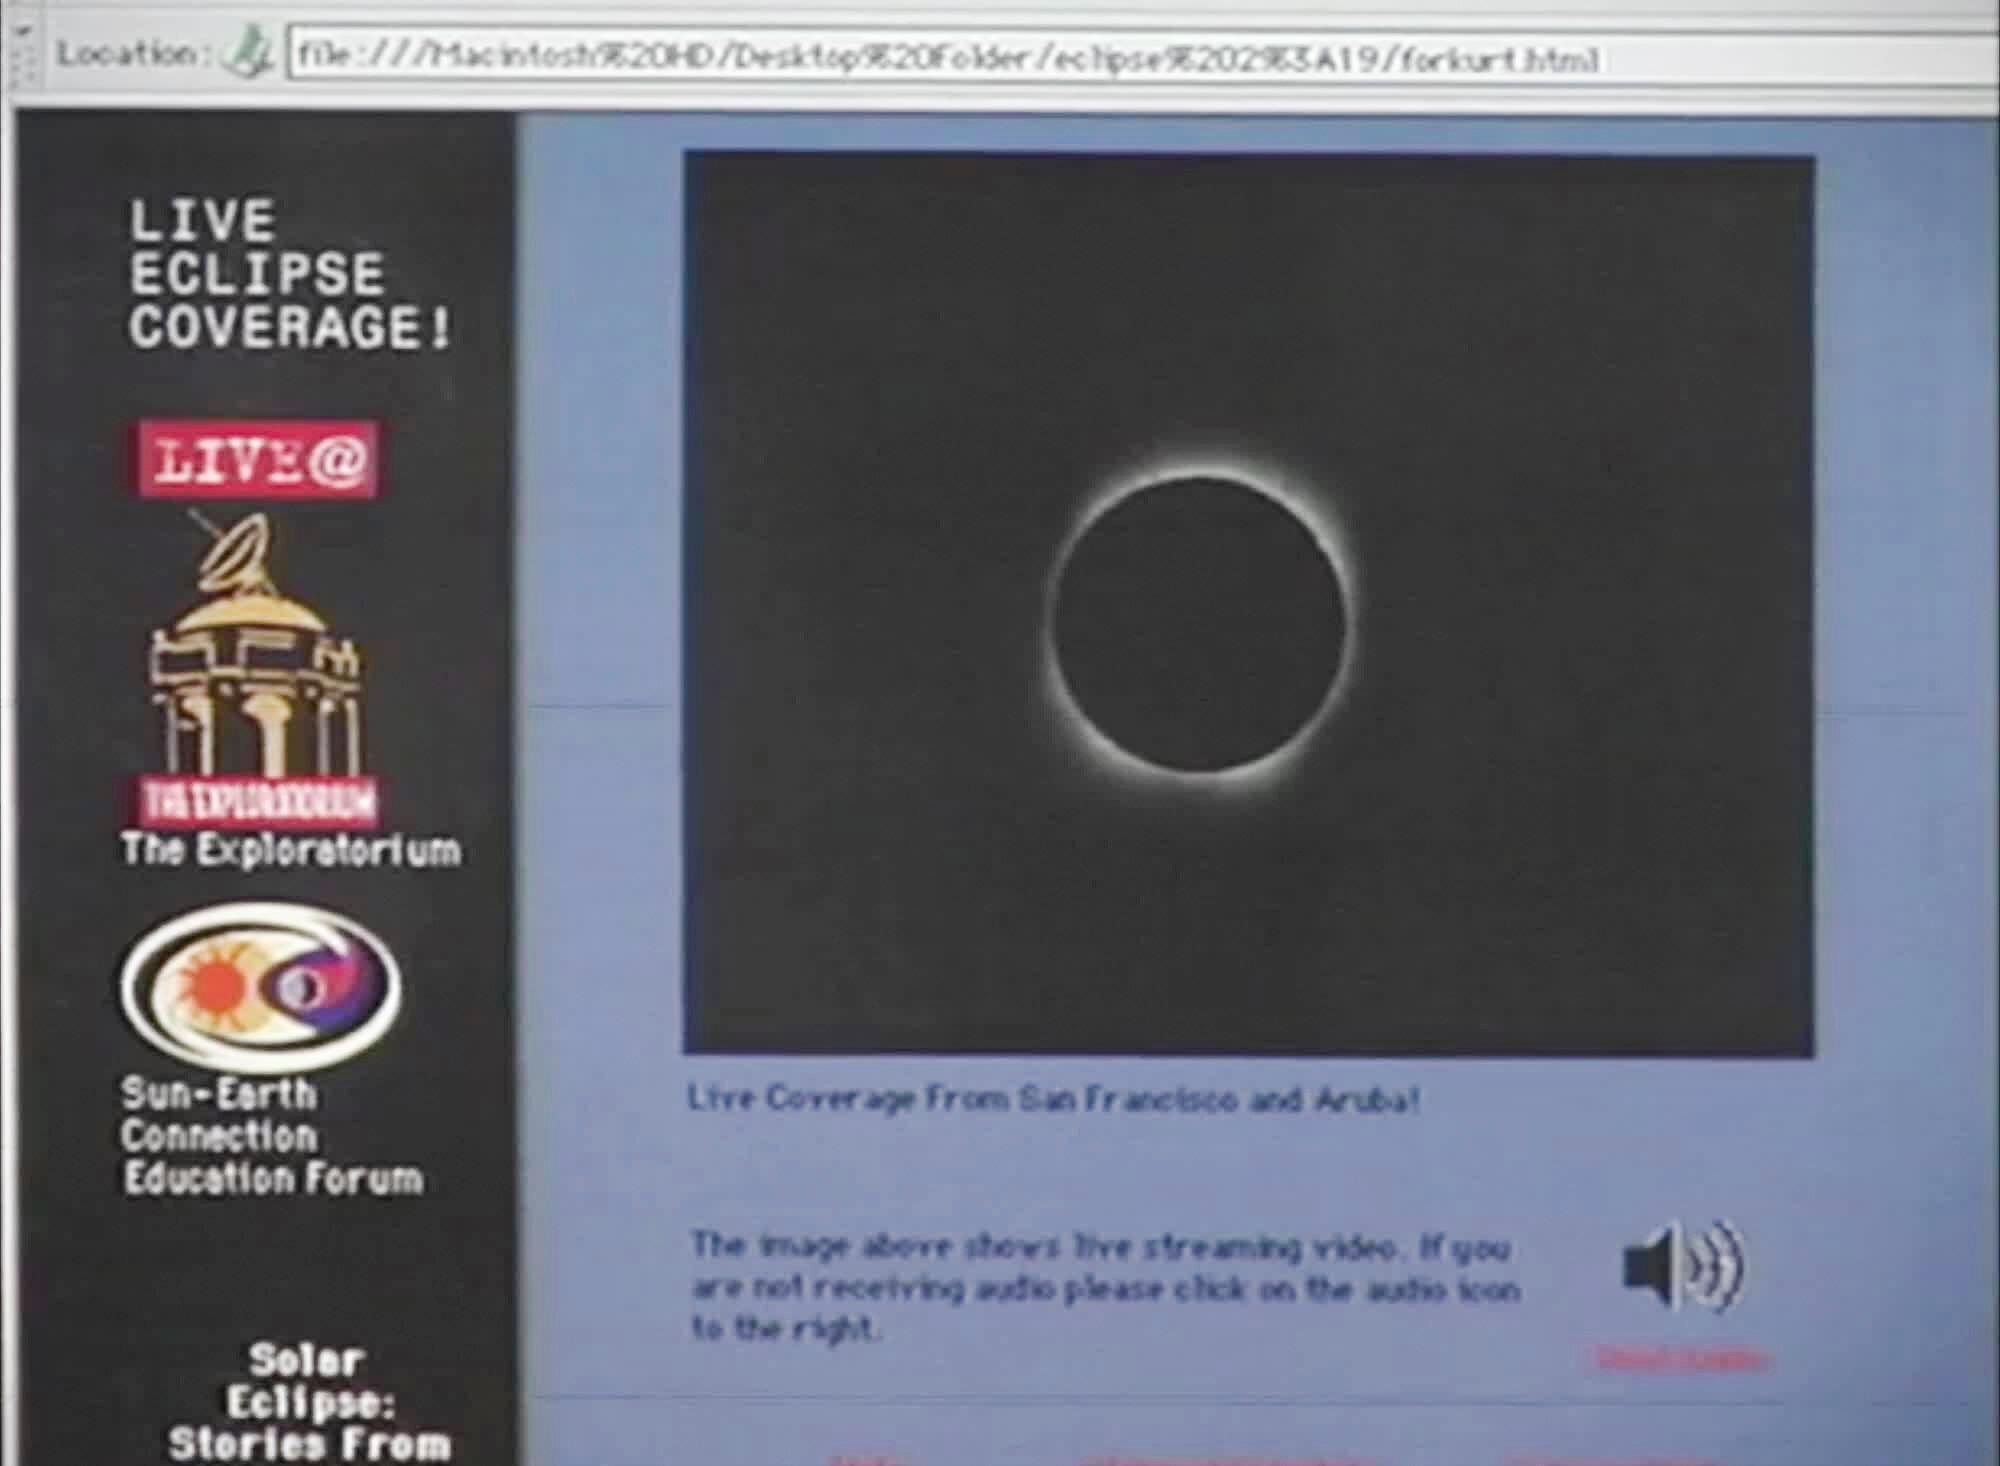 Back in the ’90s, This Eclipse Webcast Put the Cosmos on Demand